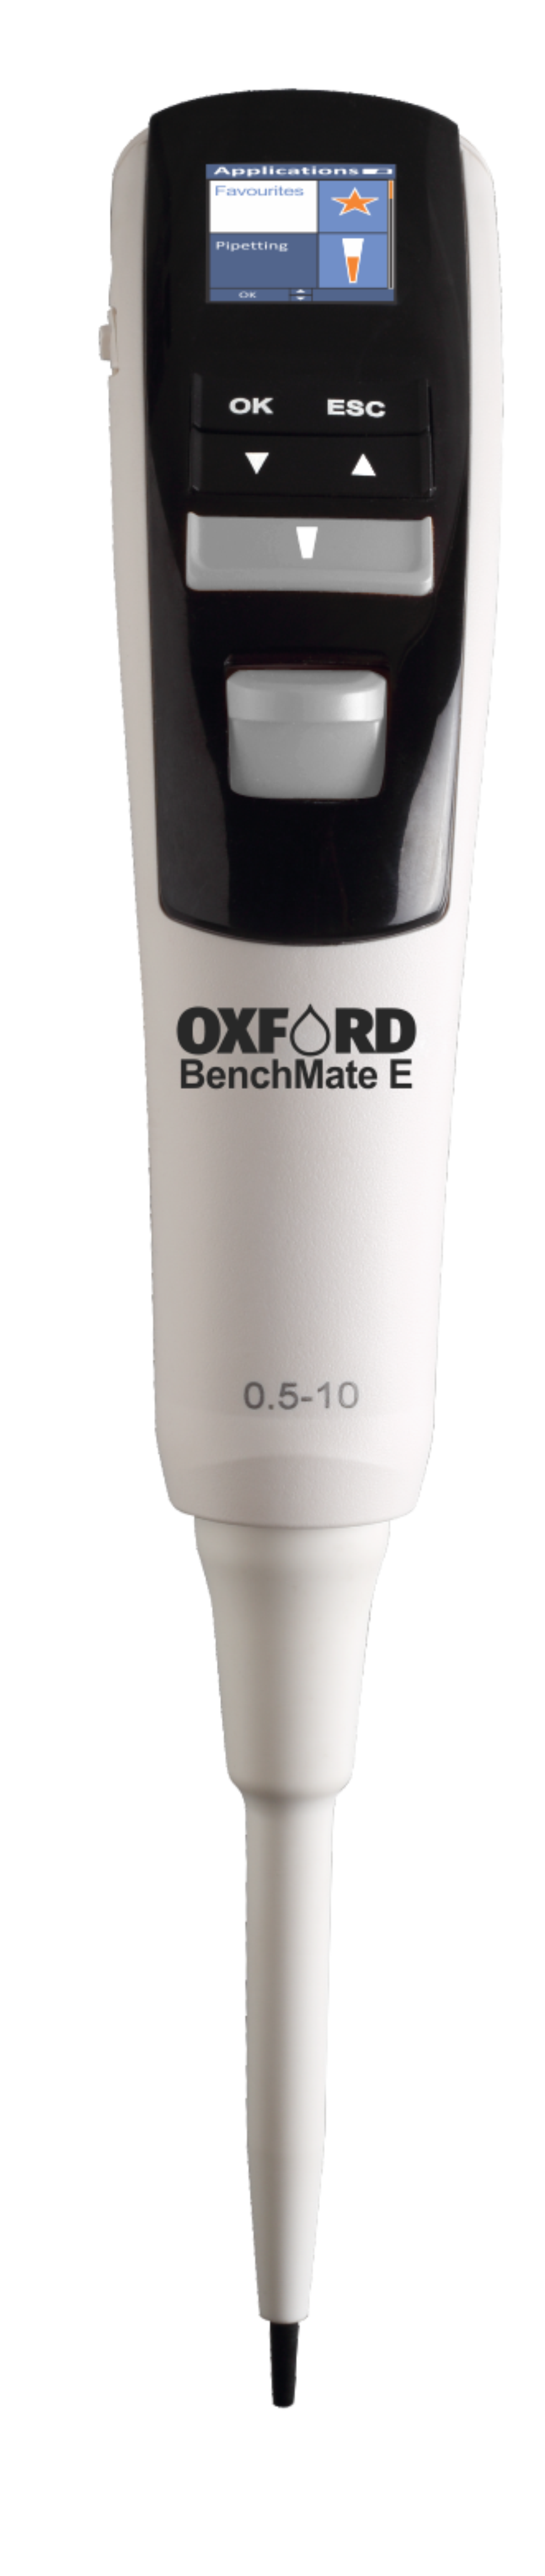 Oxford BenchMate Electronic Pipette 50-1000 µl